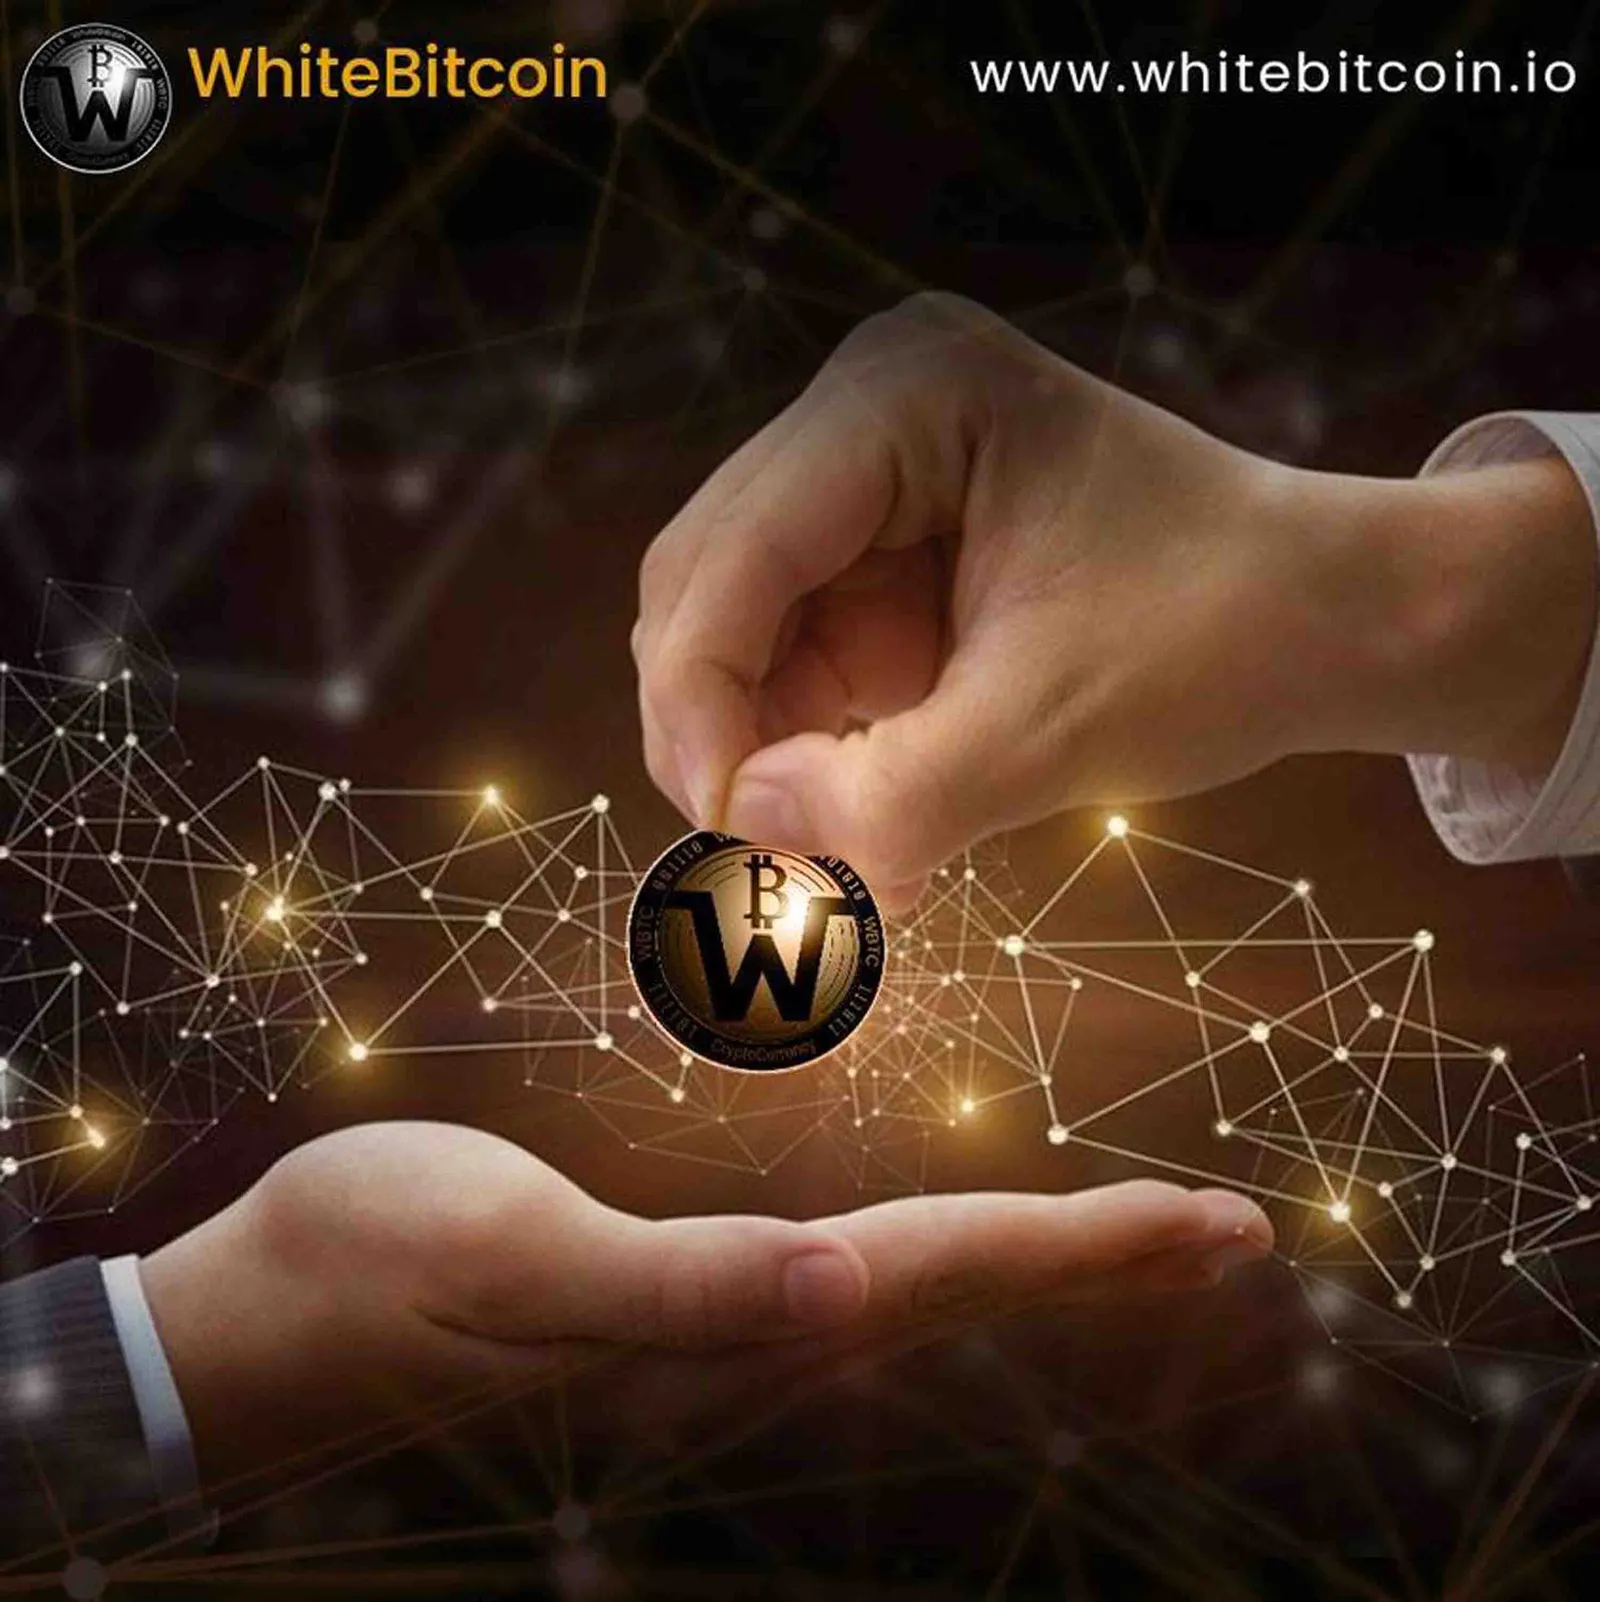 Is white bitcoin a good investment in 2021?